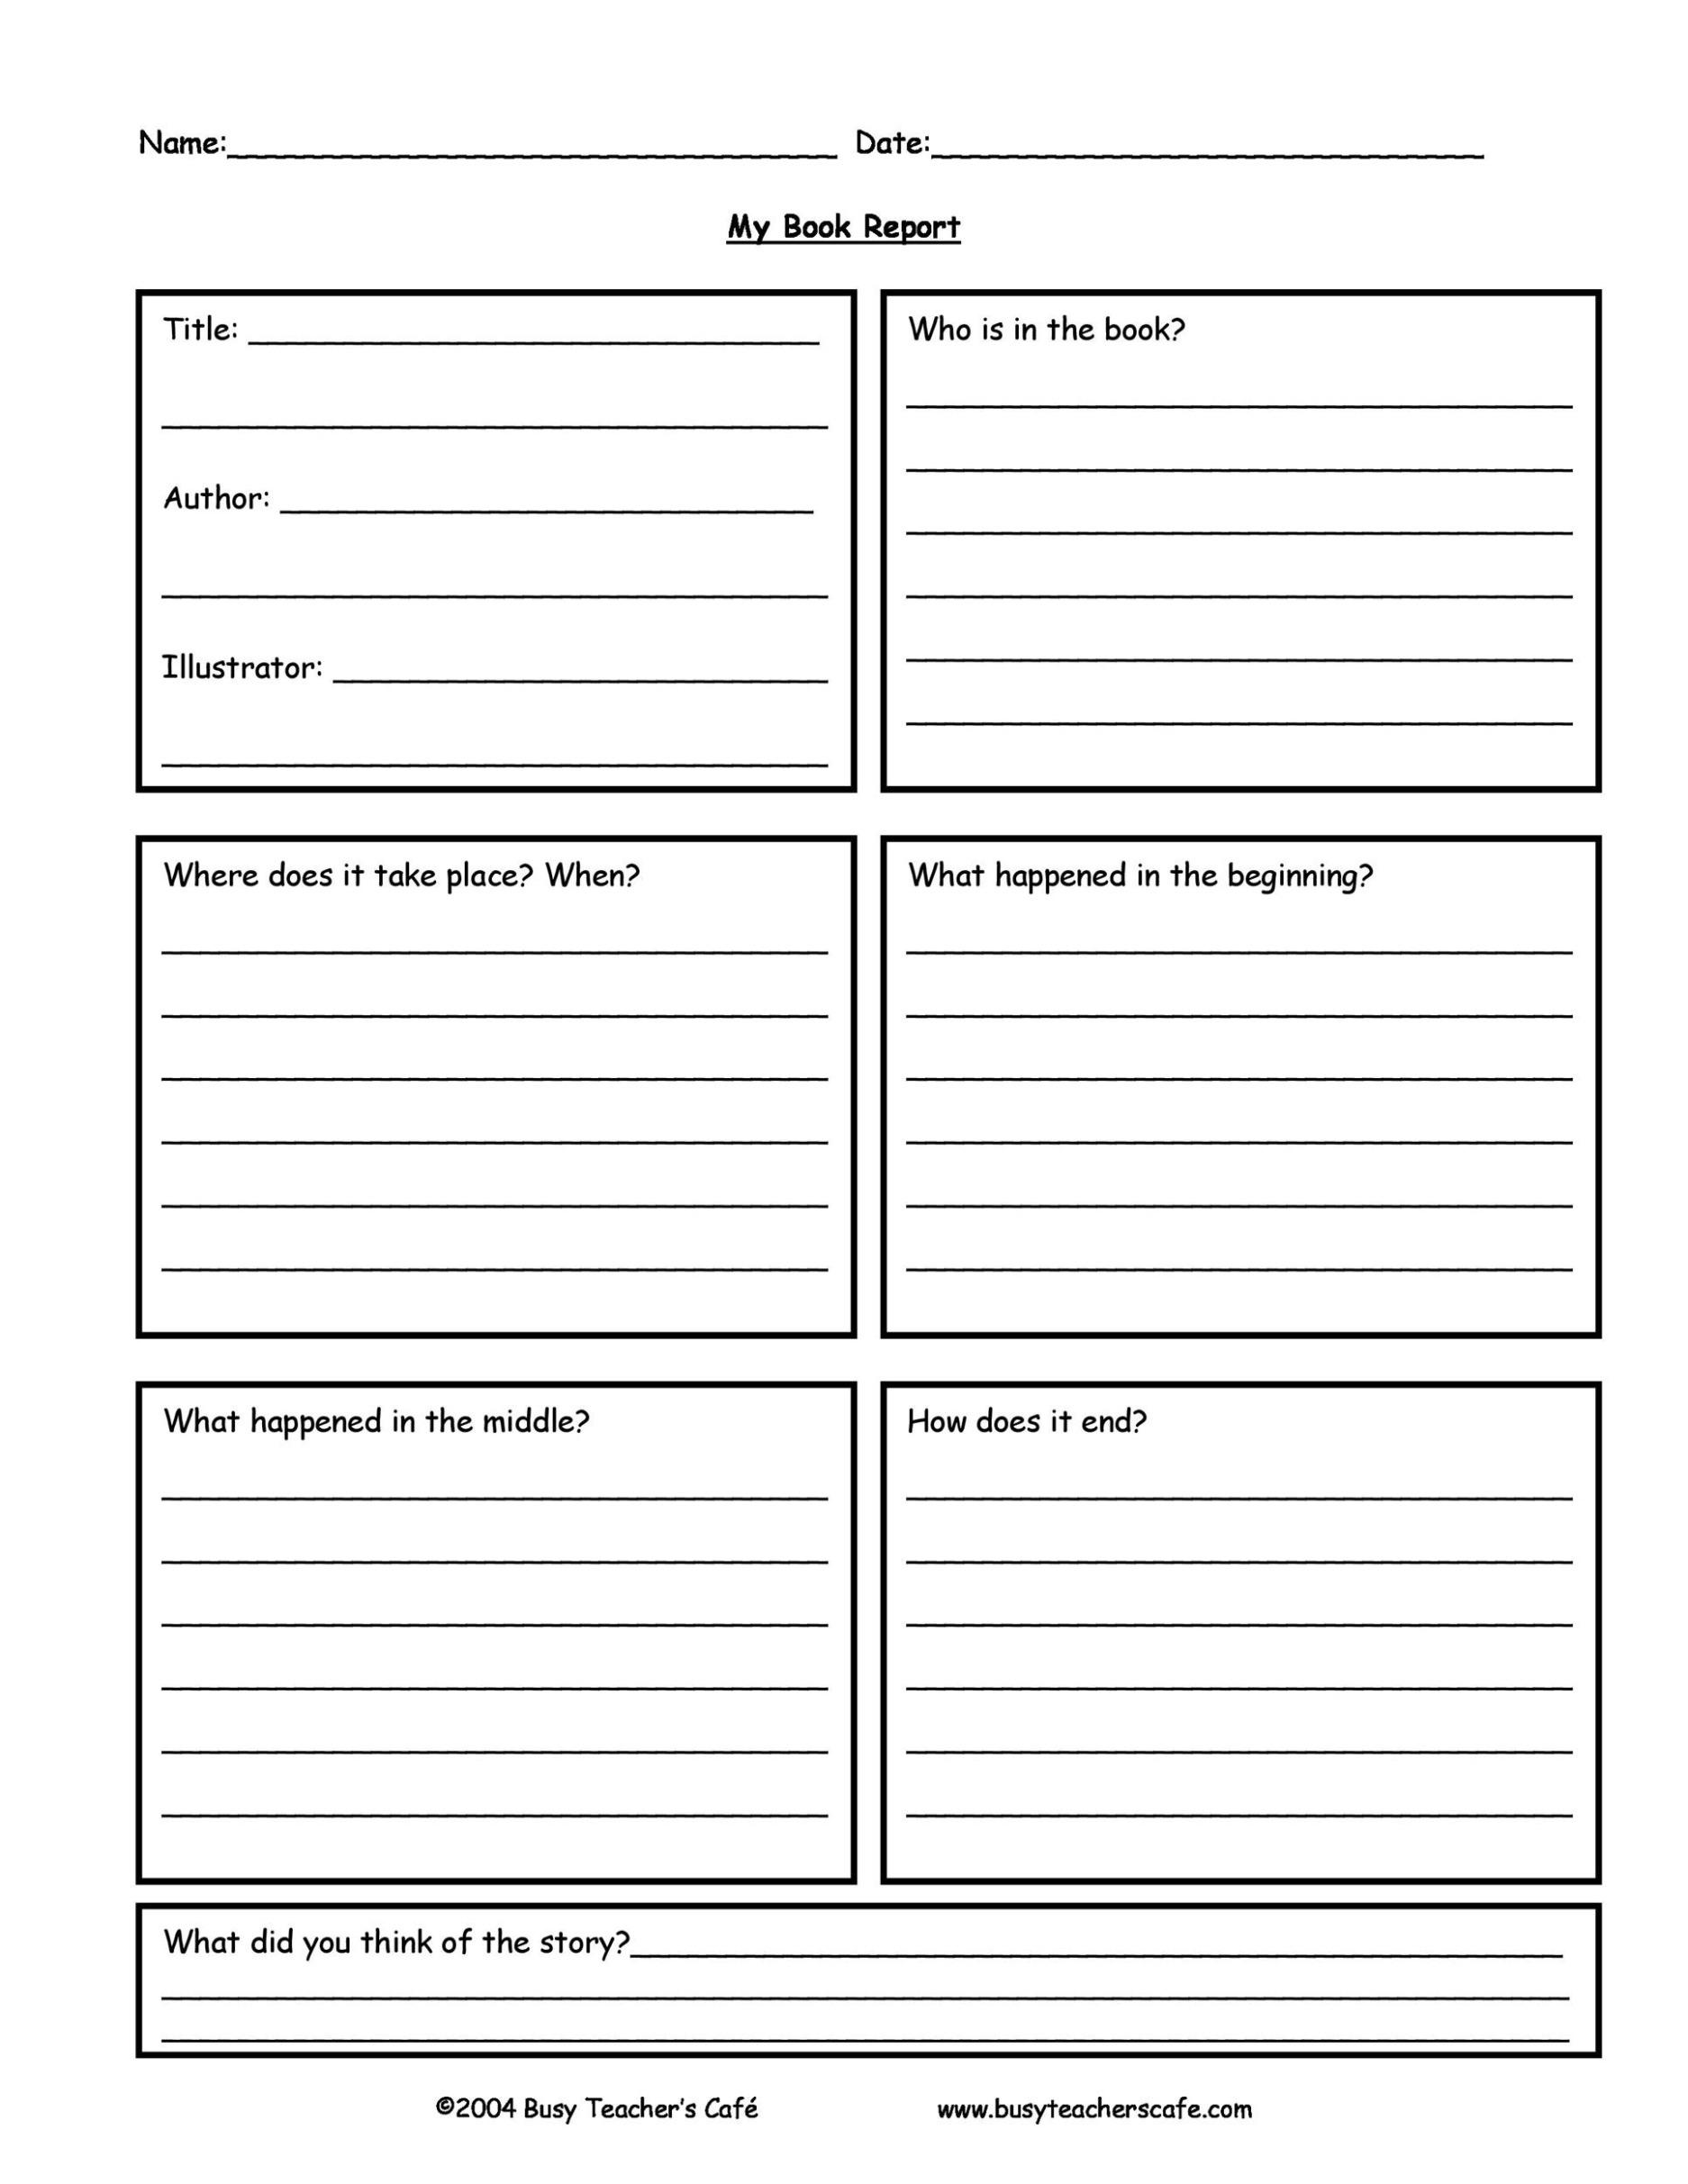 professional-book-report-template-for-5th-graders-excel-sample